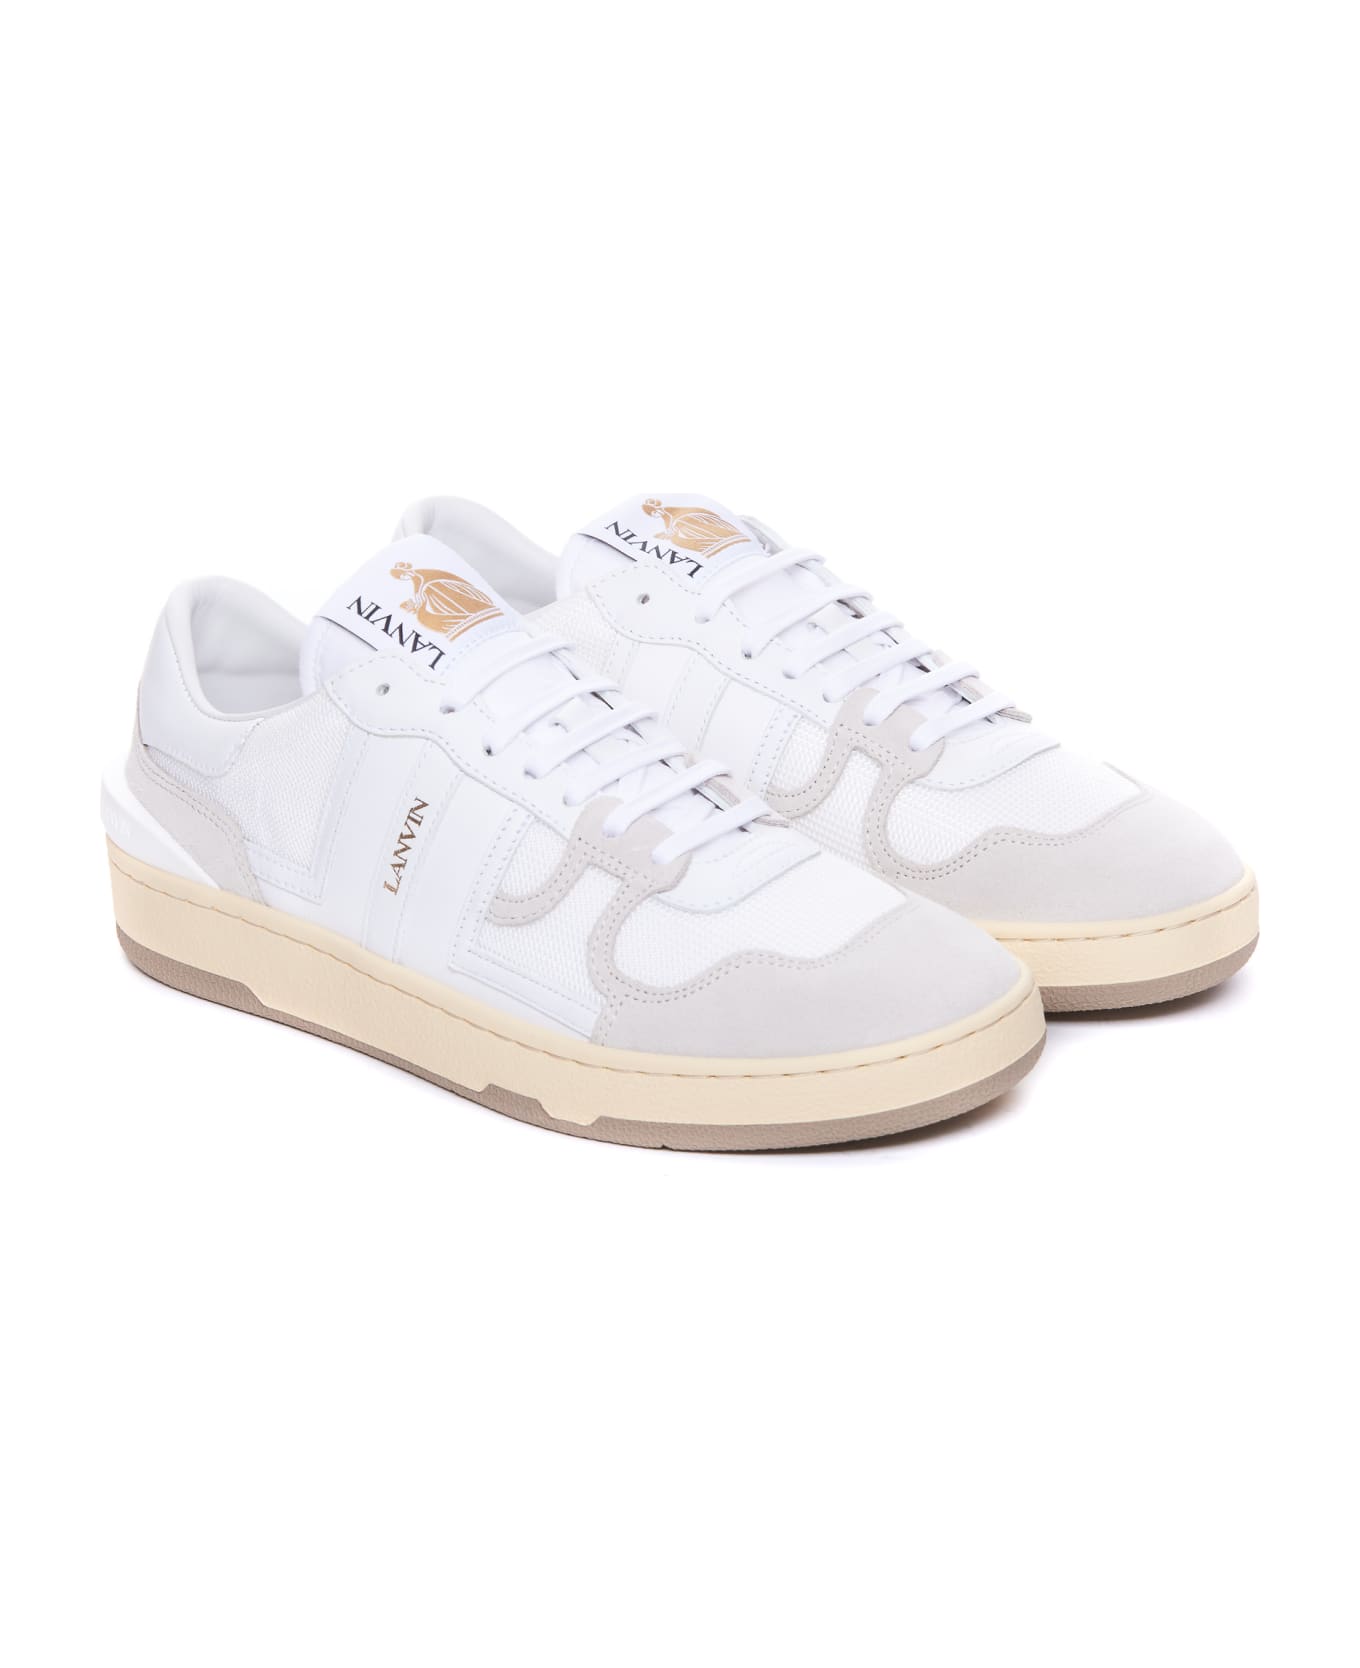 Lanvin Clay Low Top Sneakers - White スニーカー